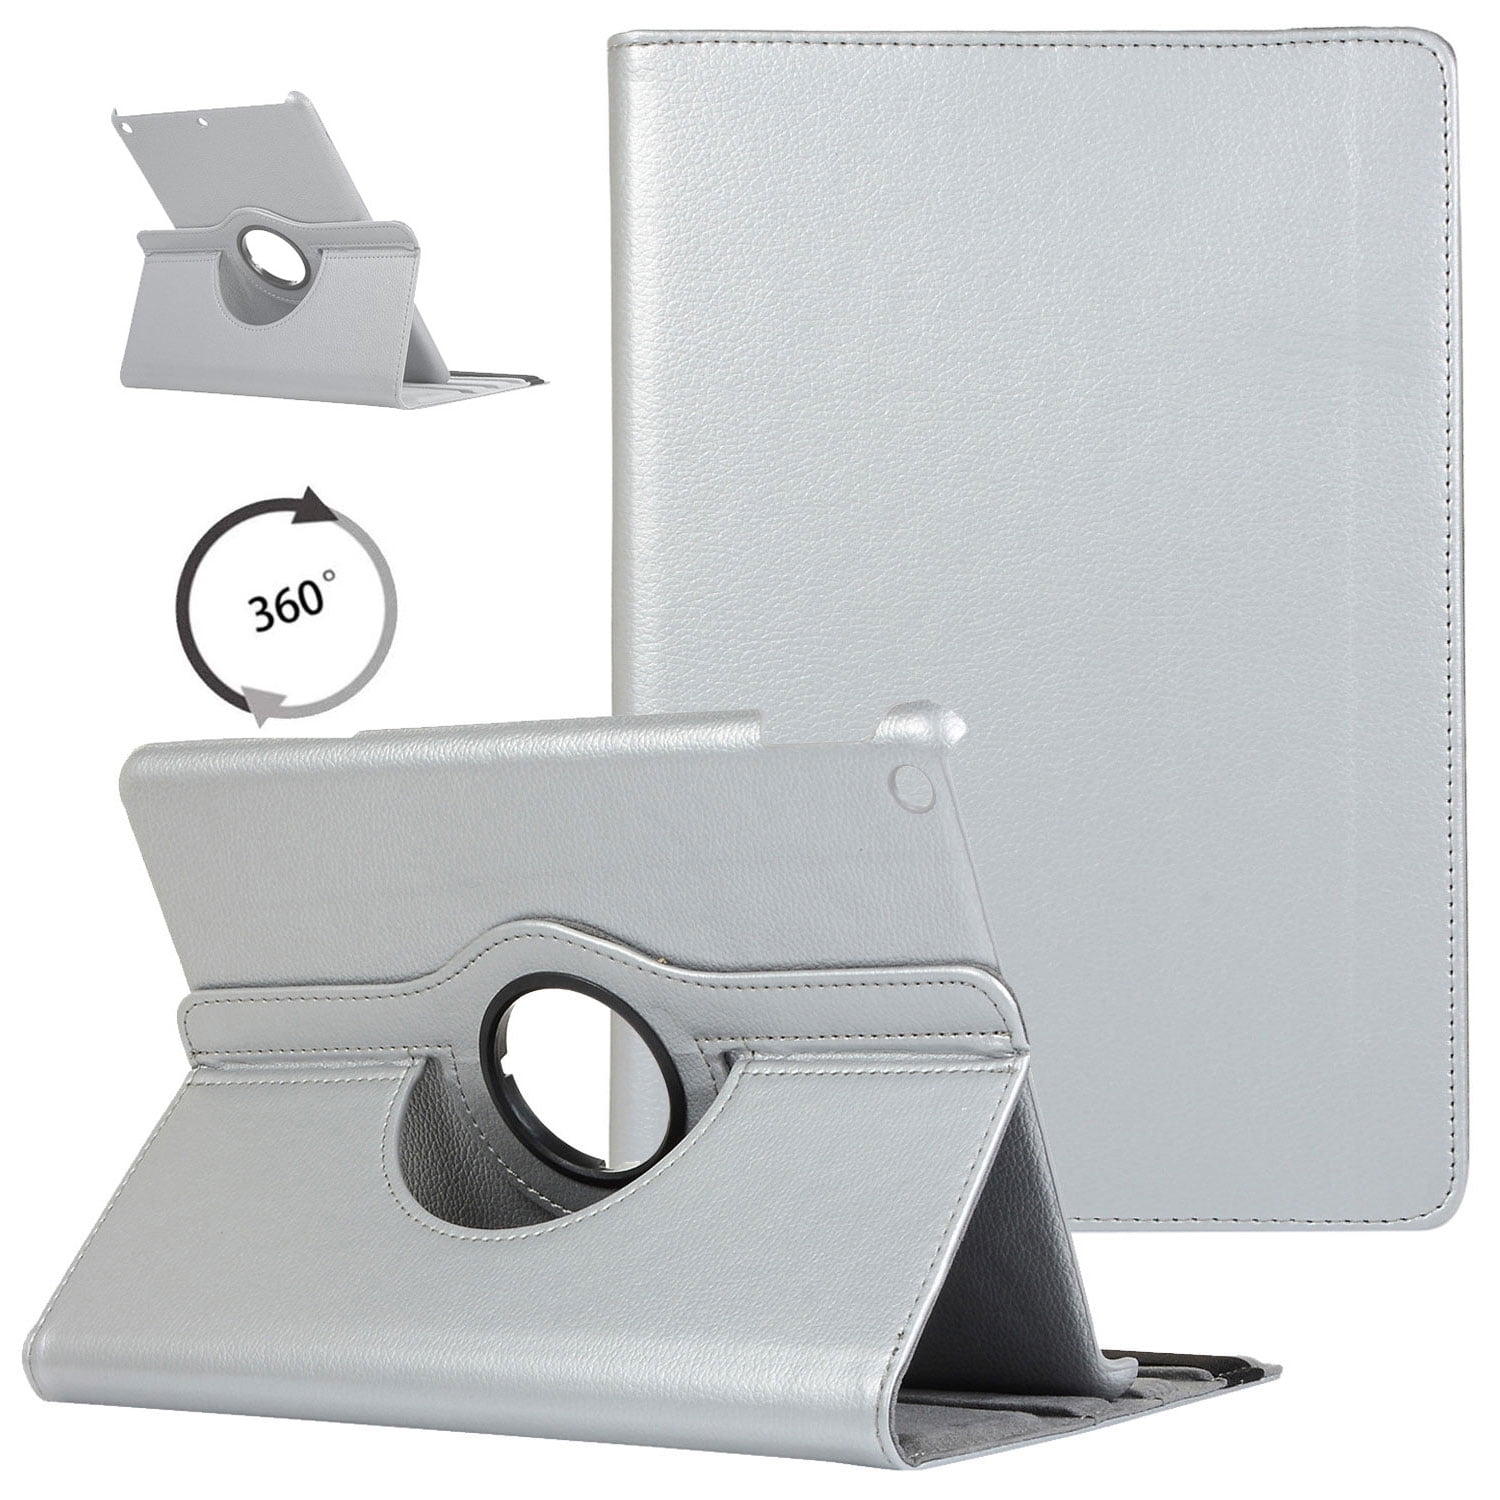 6th Generation For Apple iPad 9.7 2018 360° Rotating Leather Smart Case Cover 